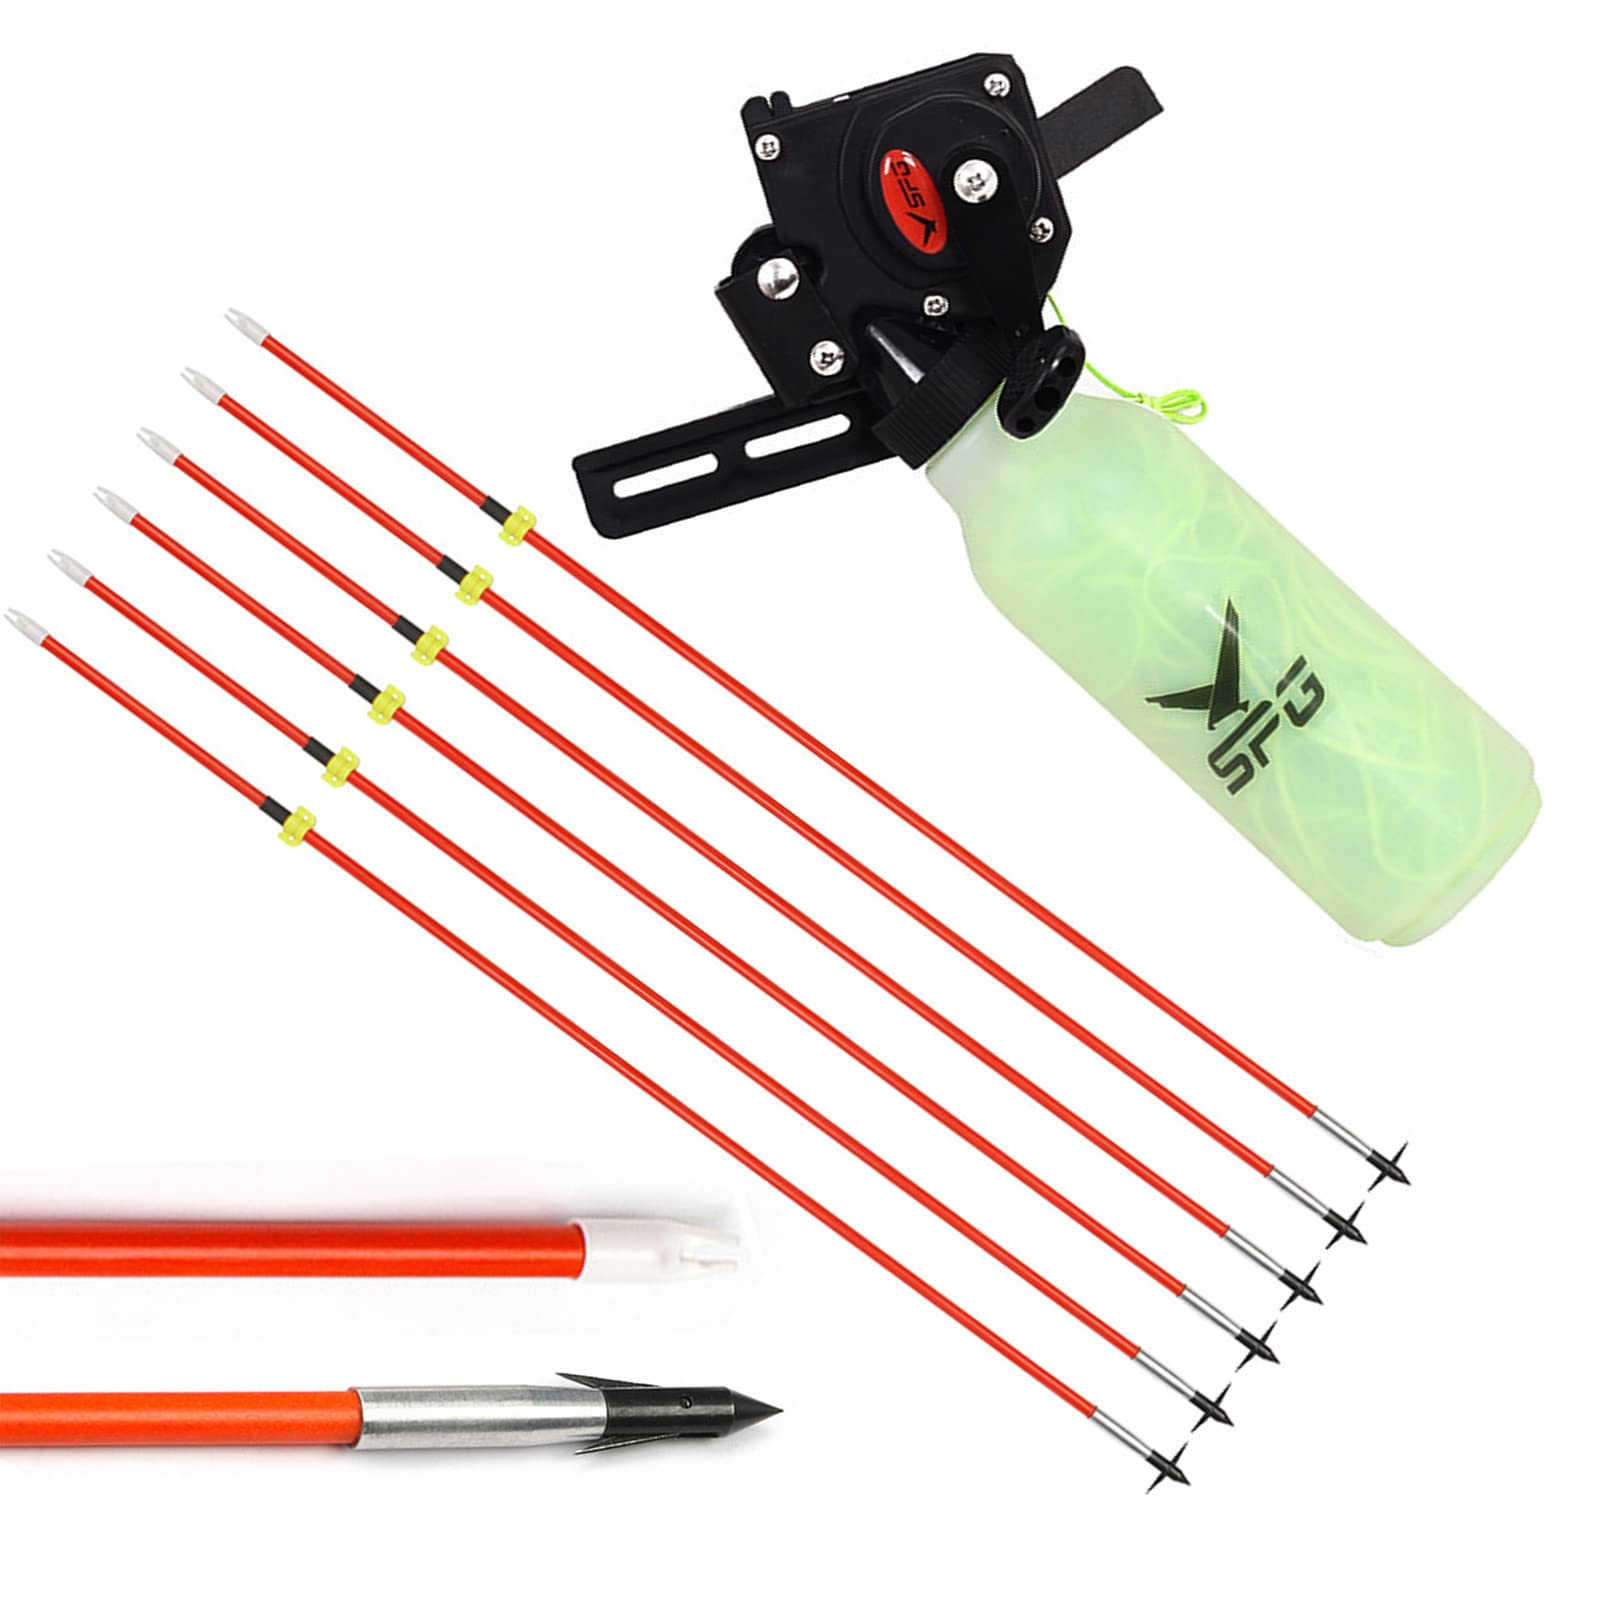 Accessories Hunting Fishing, Bow Arrows Hunting Fishing